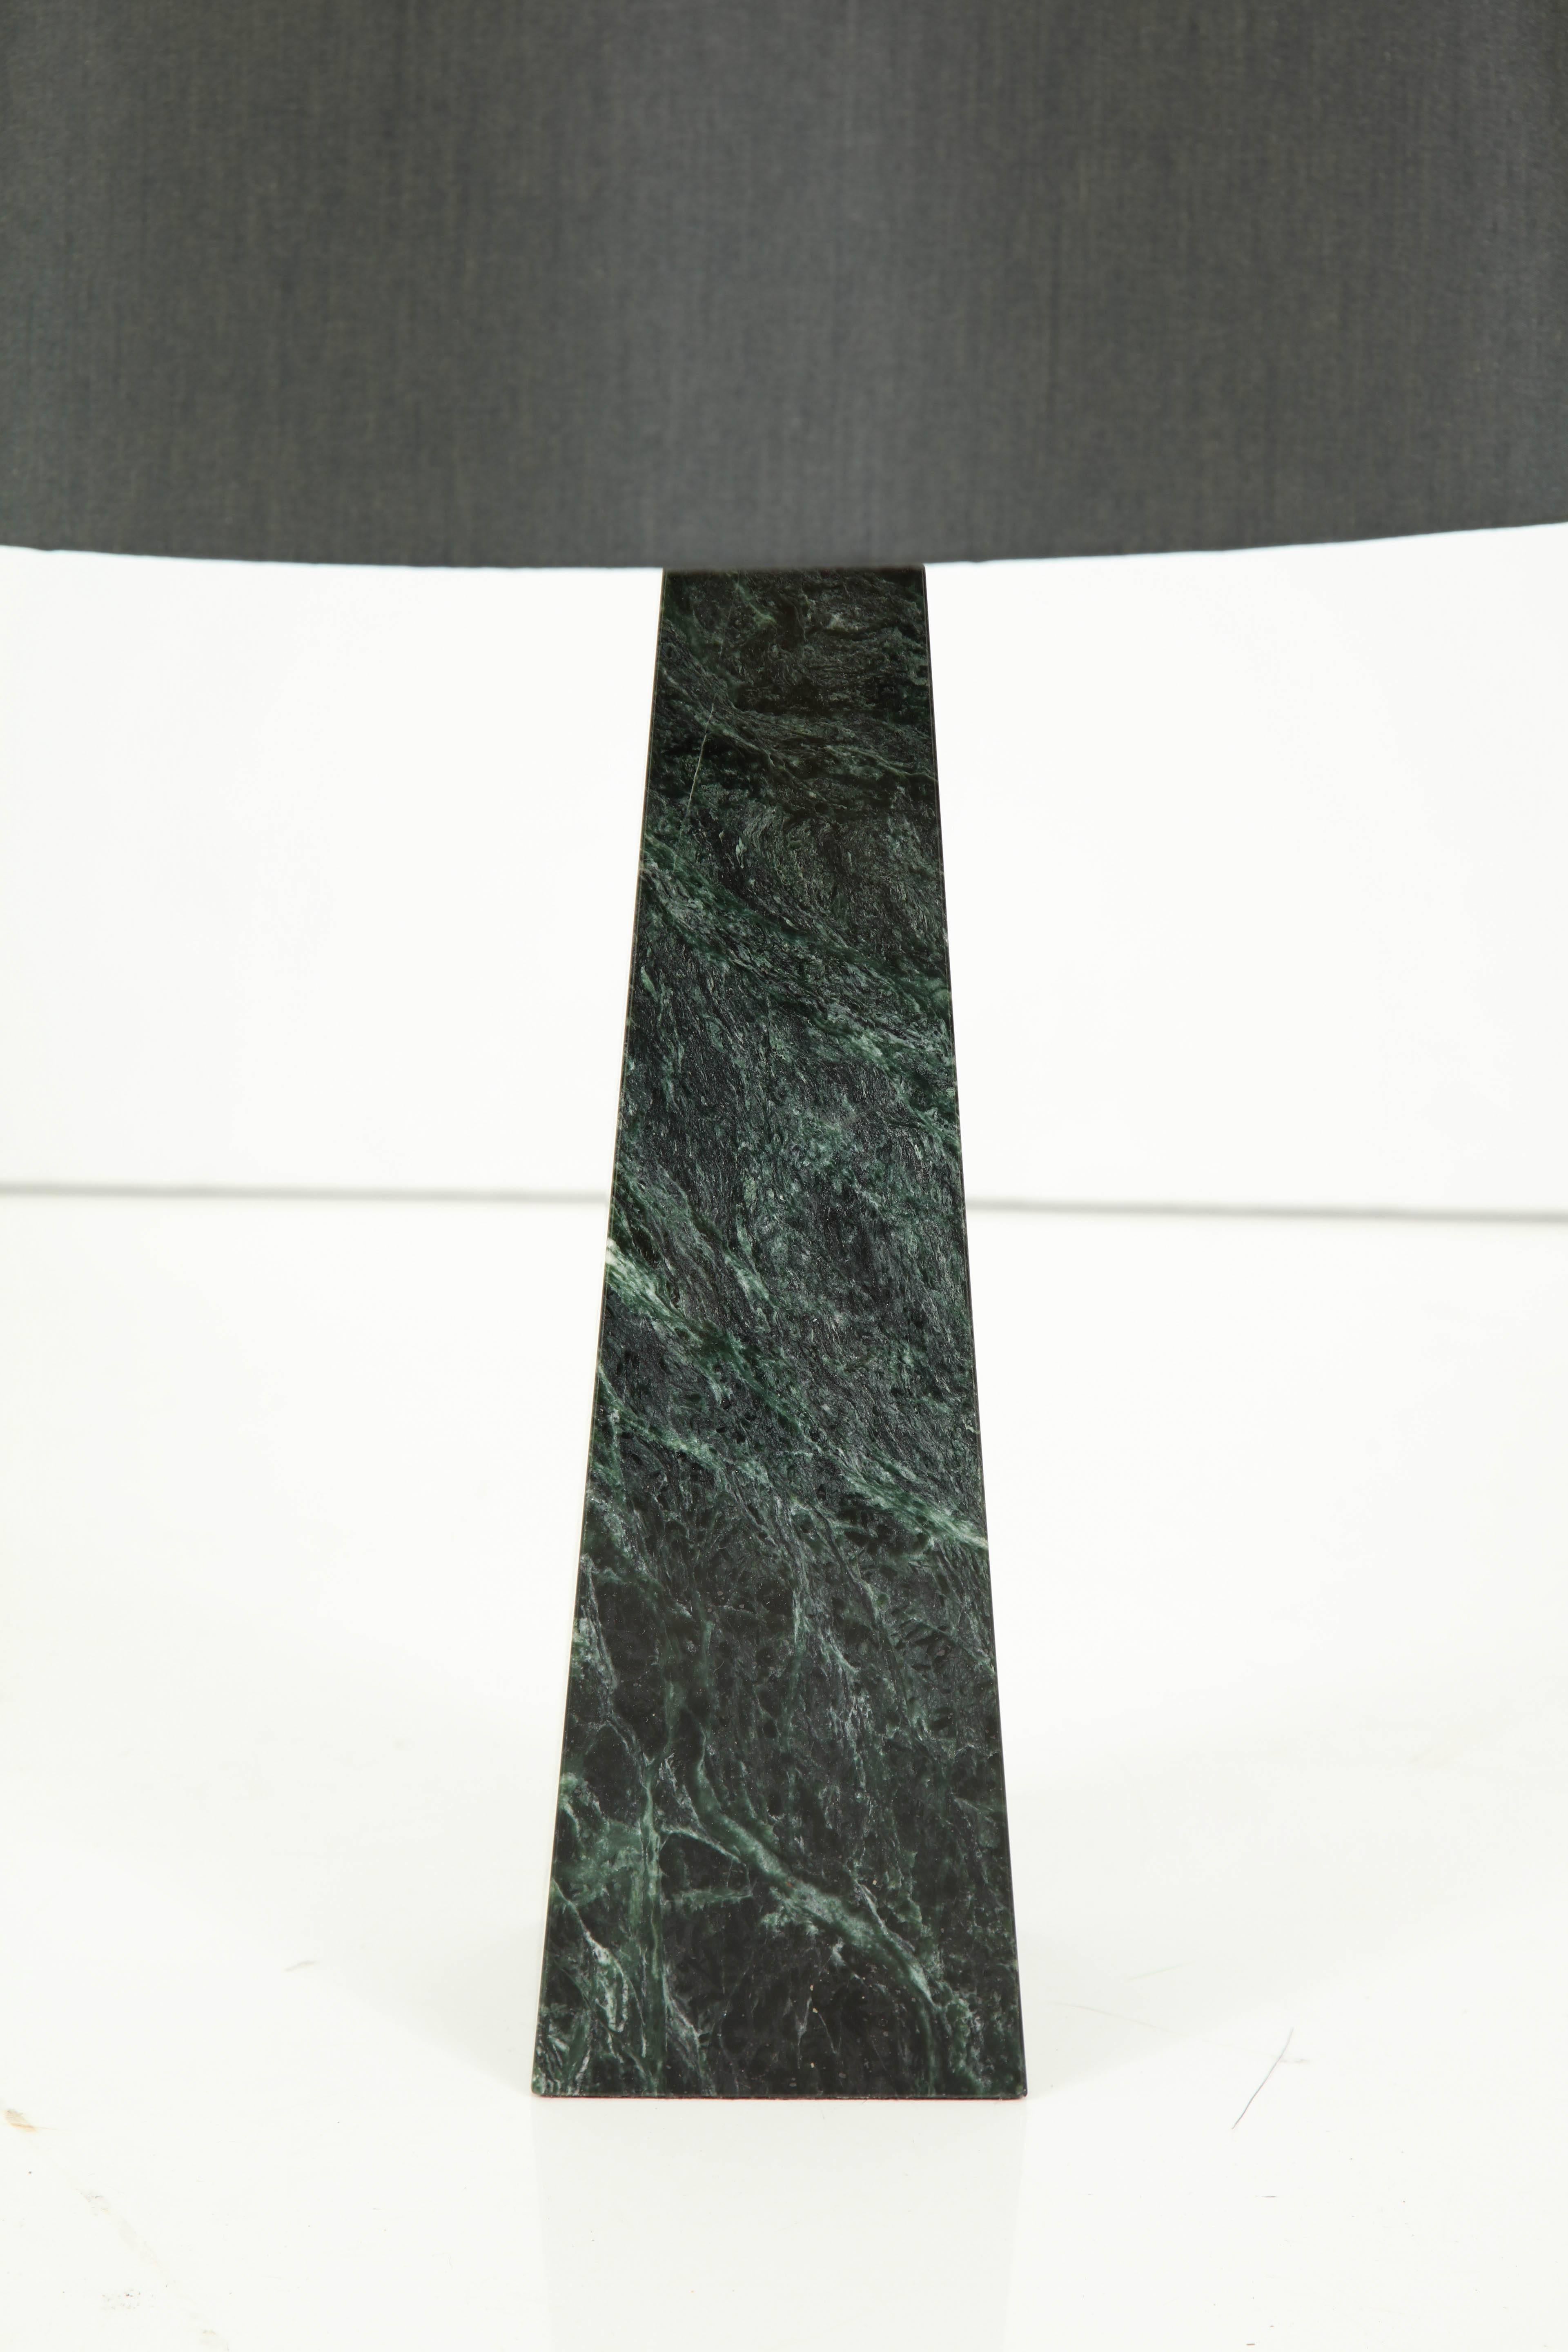 Green marble obelisk desk lamp with bronze finished hardware and charcoal silk shade, circa 1960.